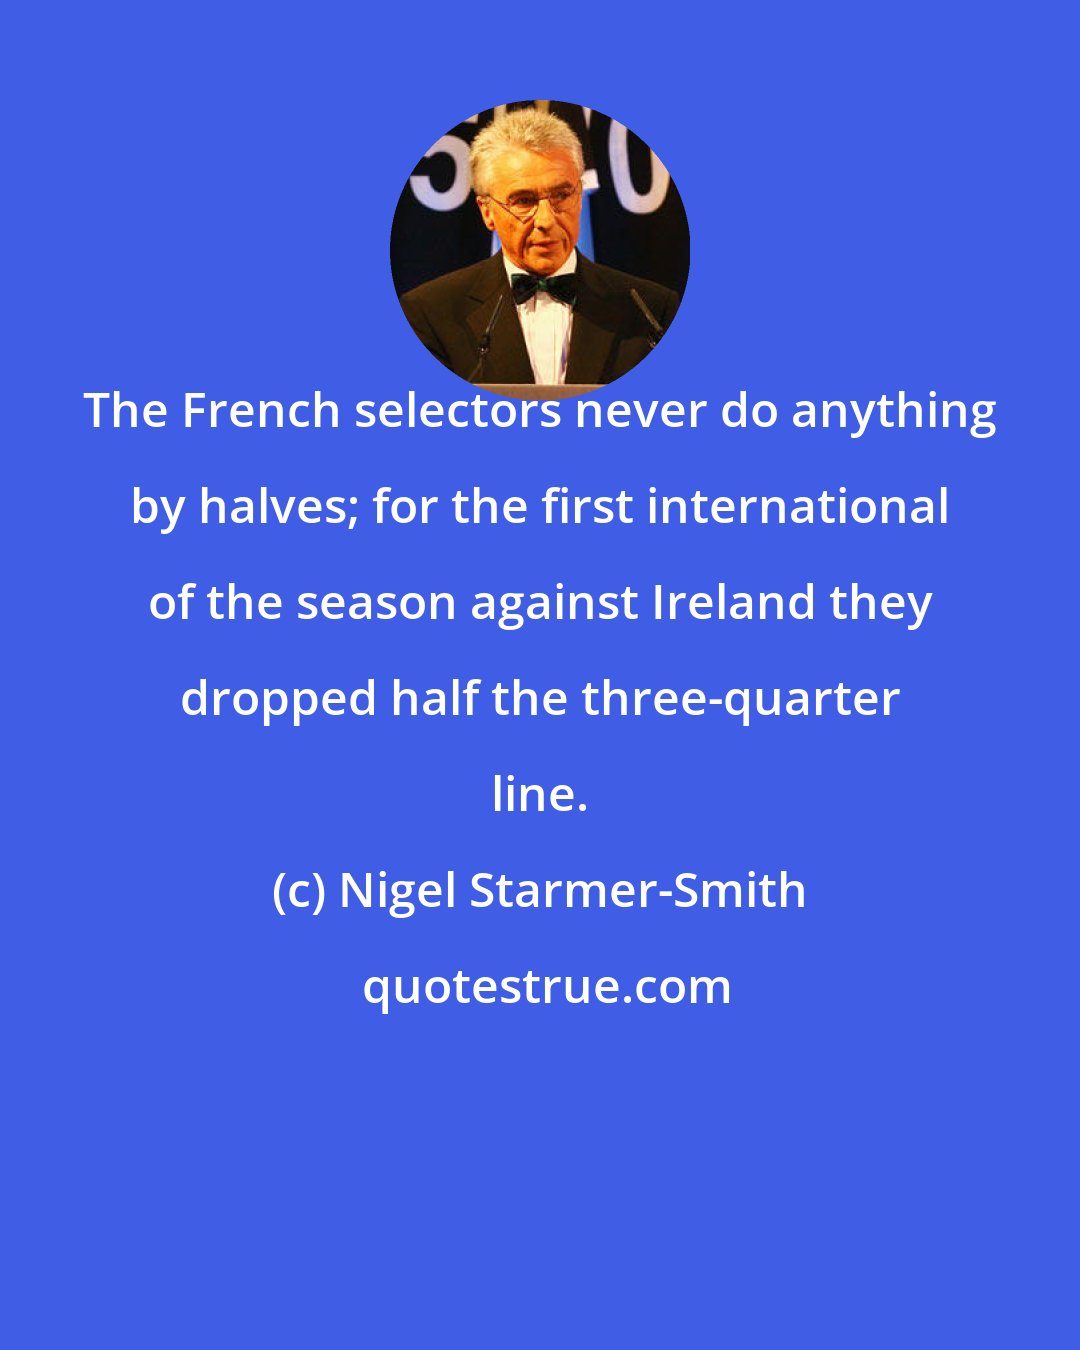 Nigel Starmer-Smith: The French selectors never do anything by halves; for the first international of the season against Ireland they dropped half the three-quarter line.